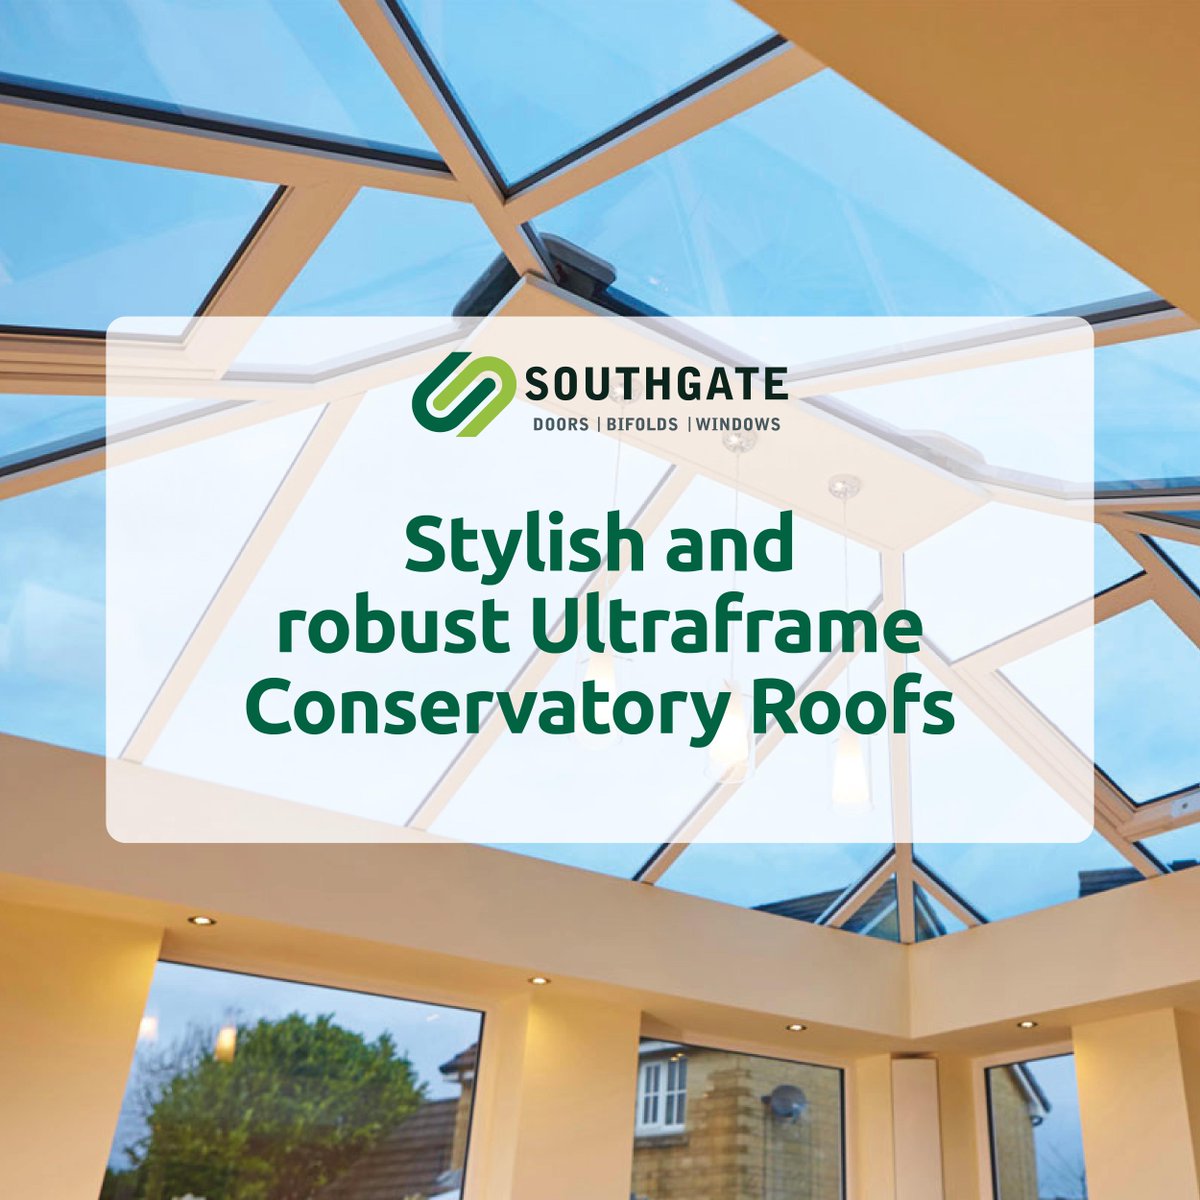 The stylish Ultraframe Conservatory Roofs add natural light and revitalise your conservatory projects with the market-leading Ultraframe Conservatory Roof Solutions. They are intelligently designed uPVC frames with superb efficiency.
Get your quote here: ow.ly/mEFo50OqMLZ